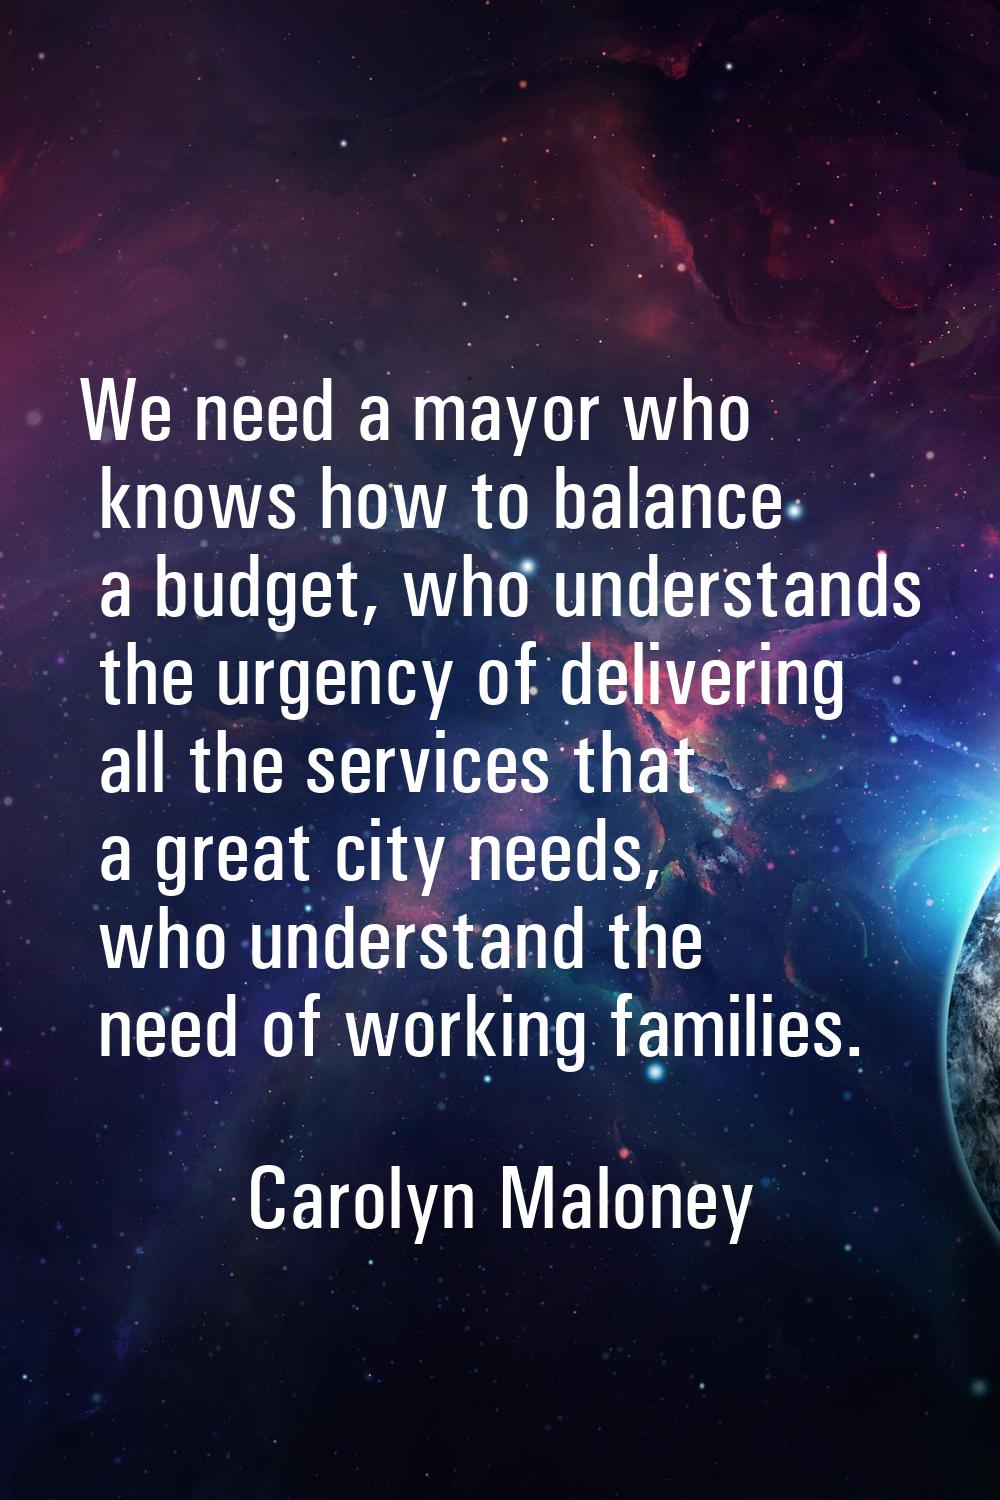 We need a mayor who knows how to balance a budget, who understands the urgency of delivering all th